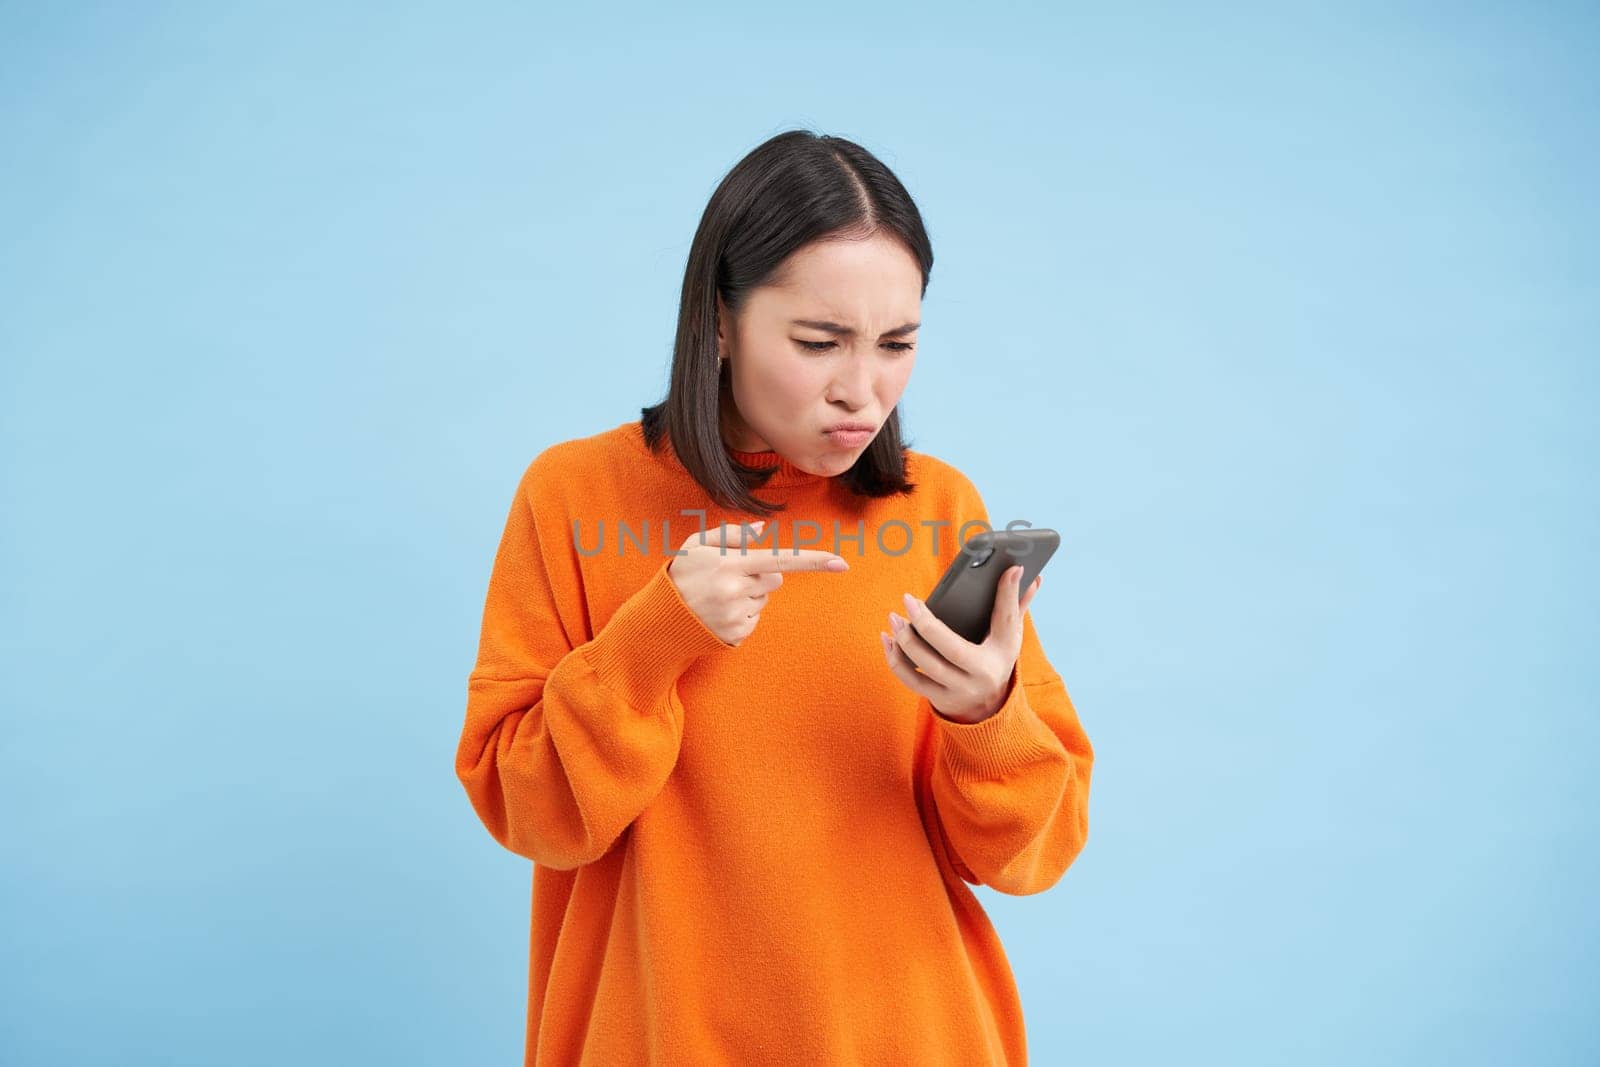 Annoyed girl with phone, points at mobile screen with frowning angry face, standing disappointed over blue background.